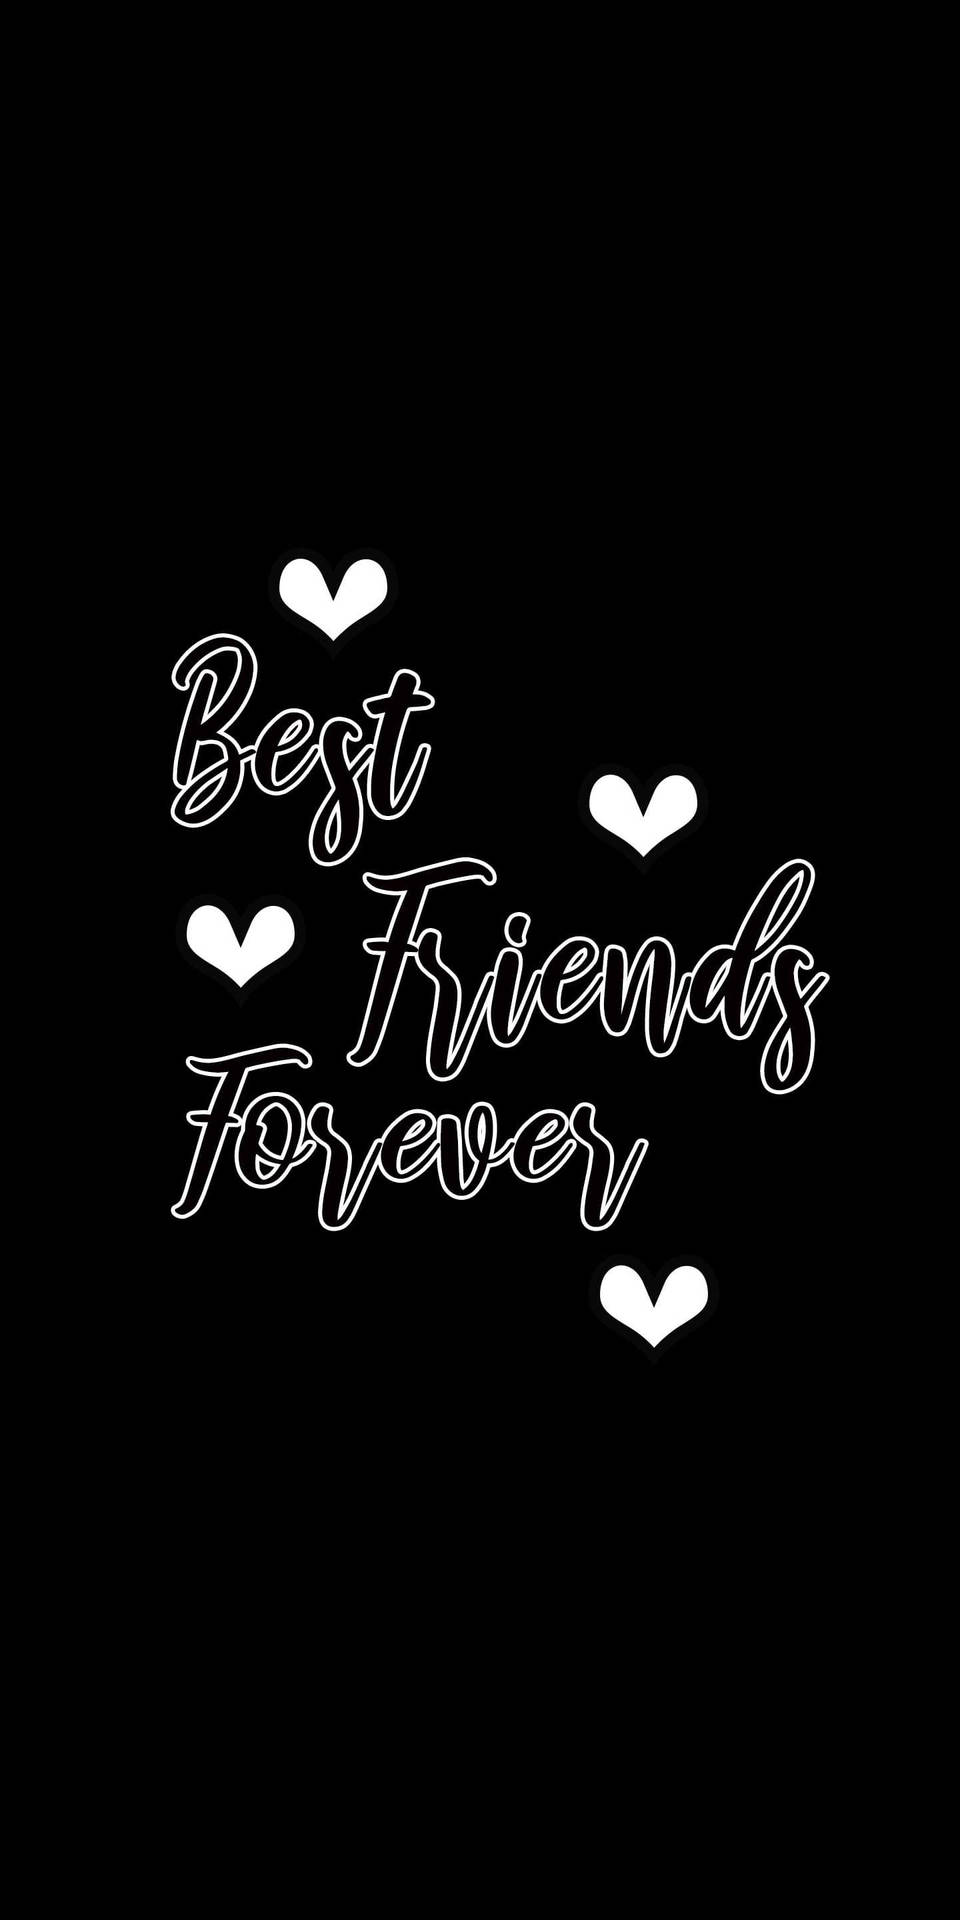 Bff 1440X2880 Wallpaper and Background Image